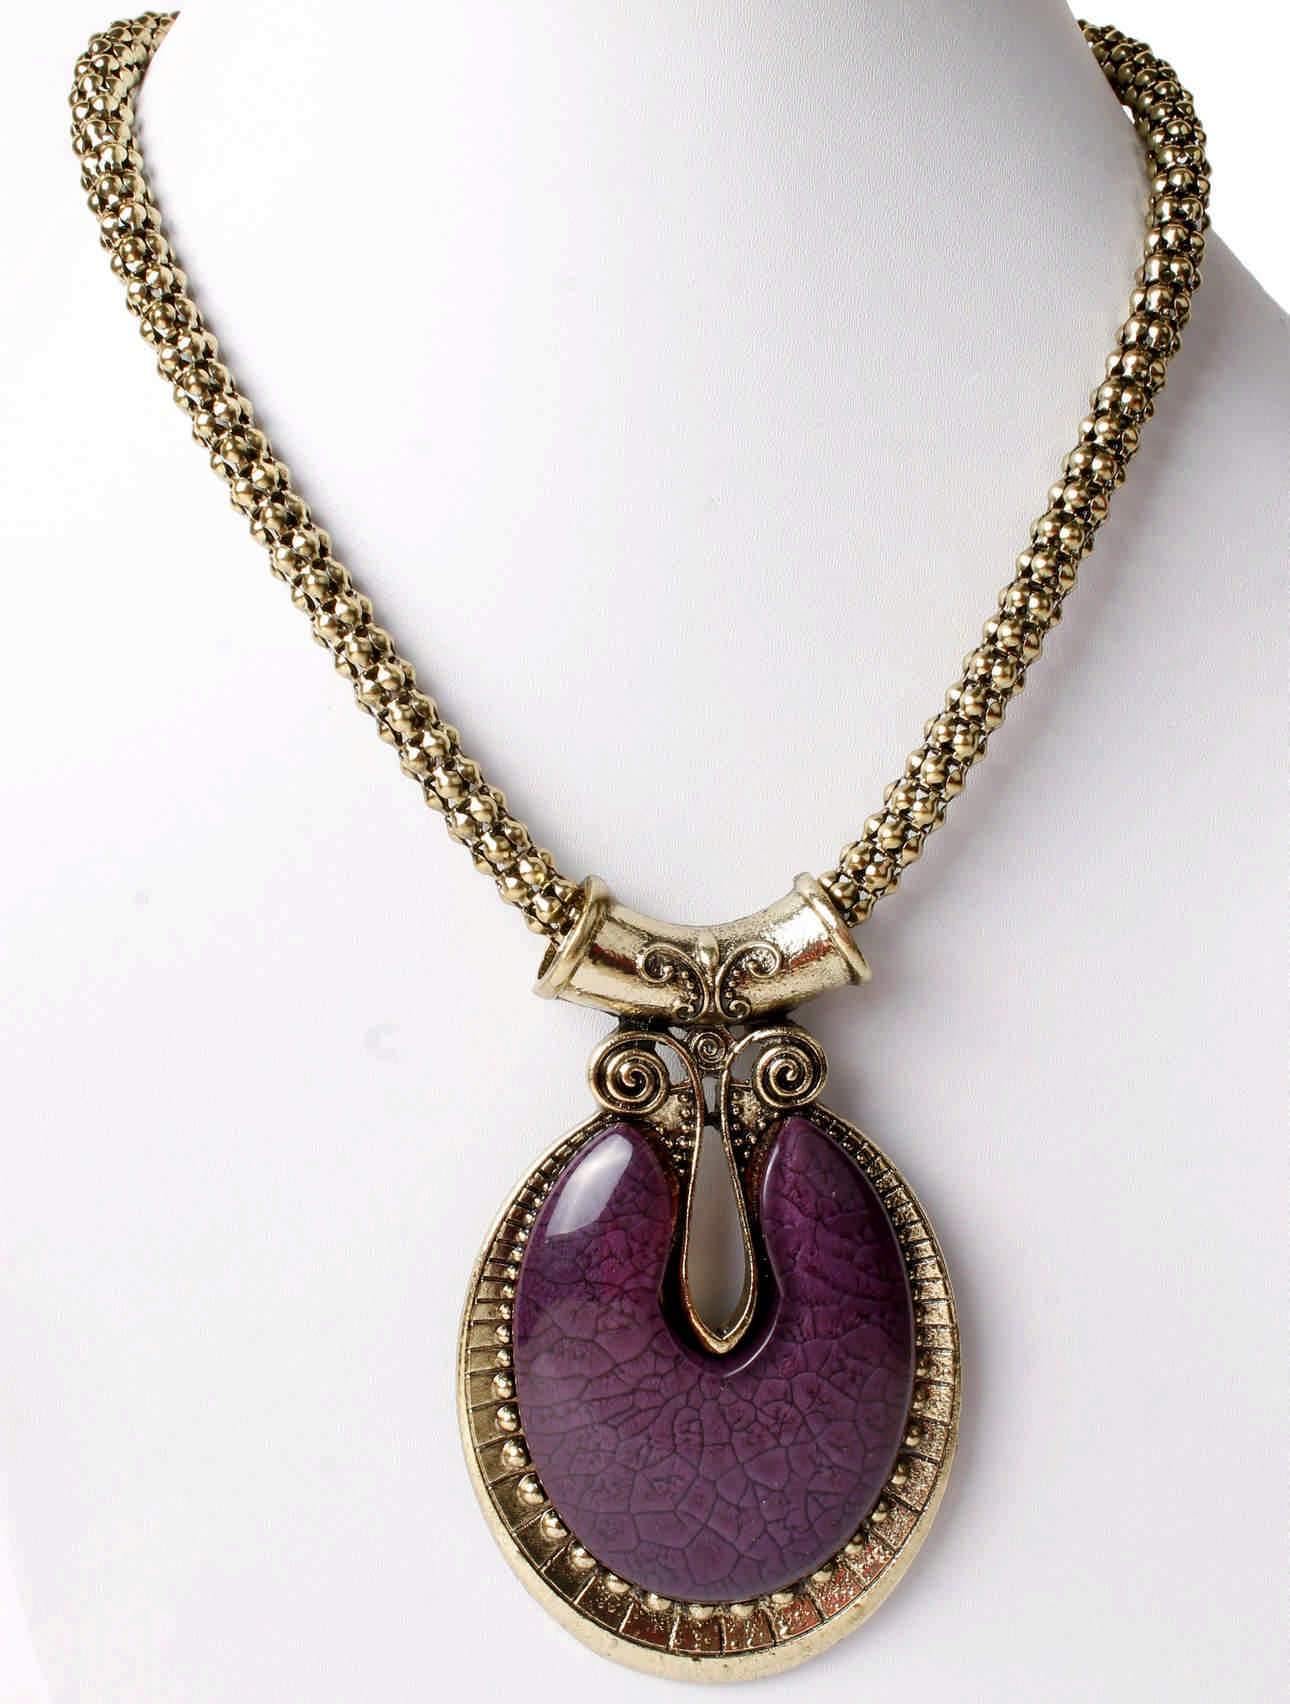 Indian Petals Big Agate Stones Design Imitation Fashion Metal Pendant with Long Chain For Girls - #Indian Petals#